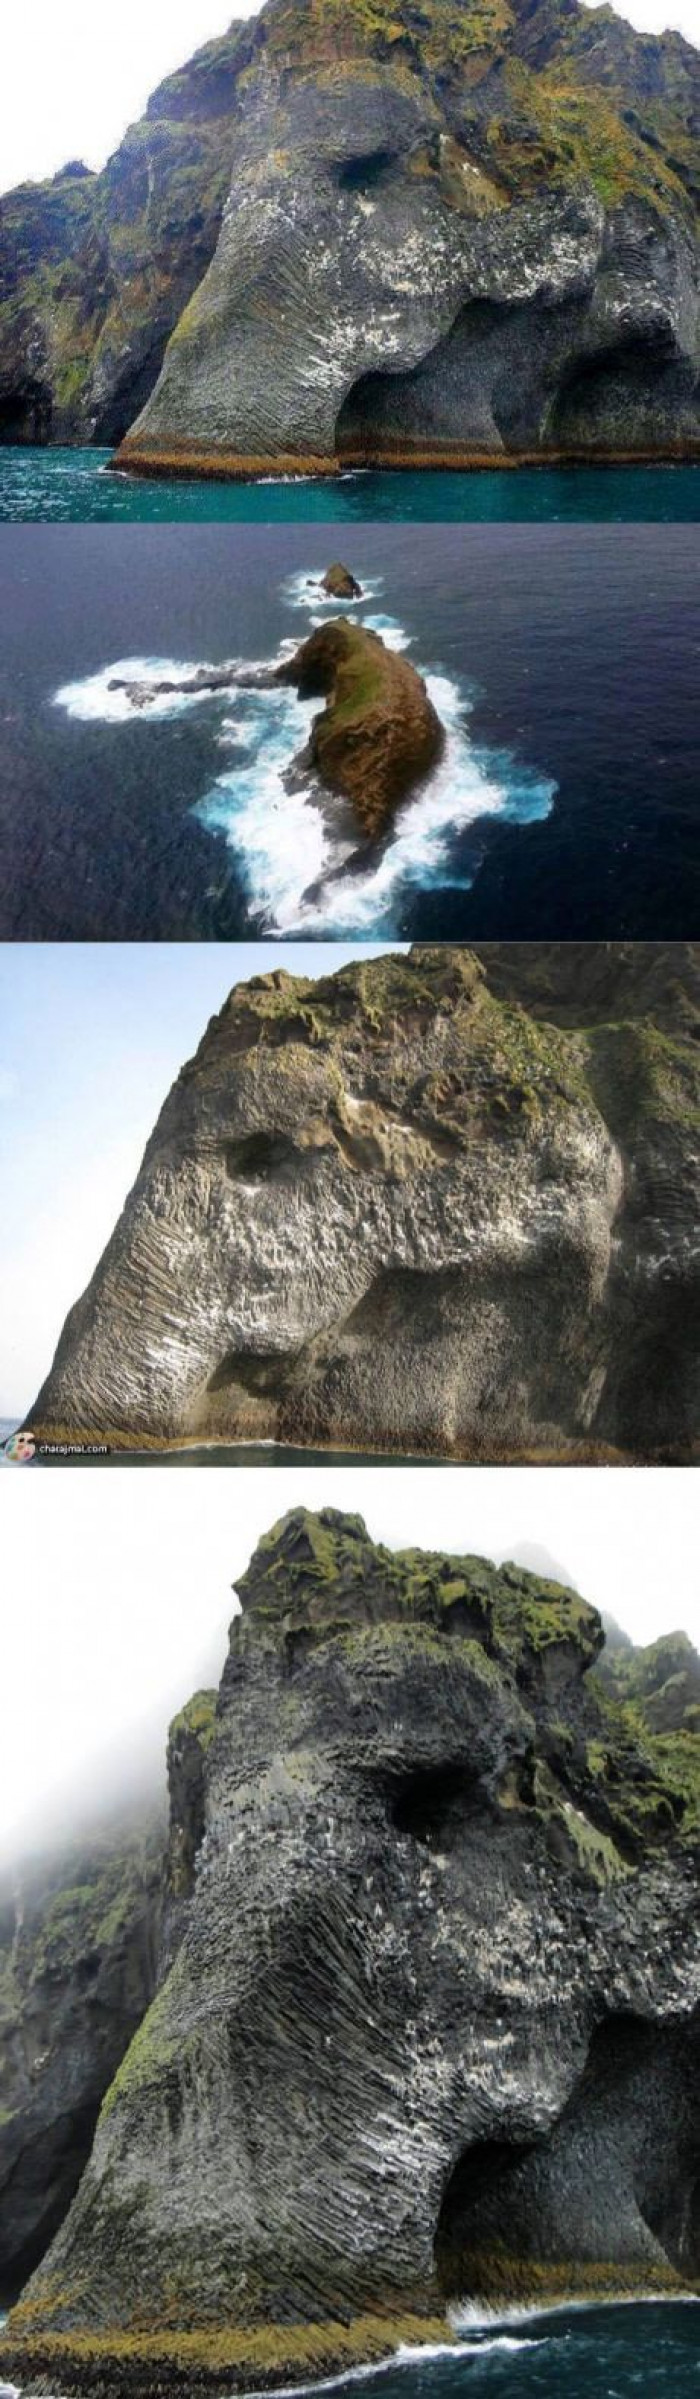 The Elephant Rock in Iceland Looks Something Out Of A Movie